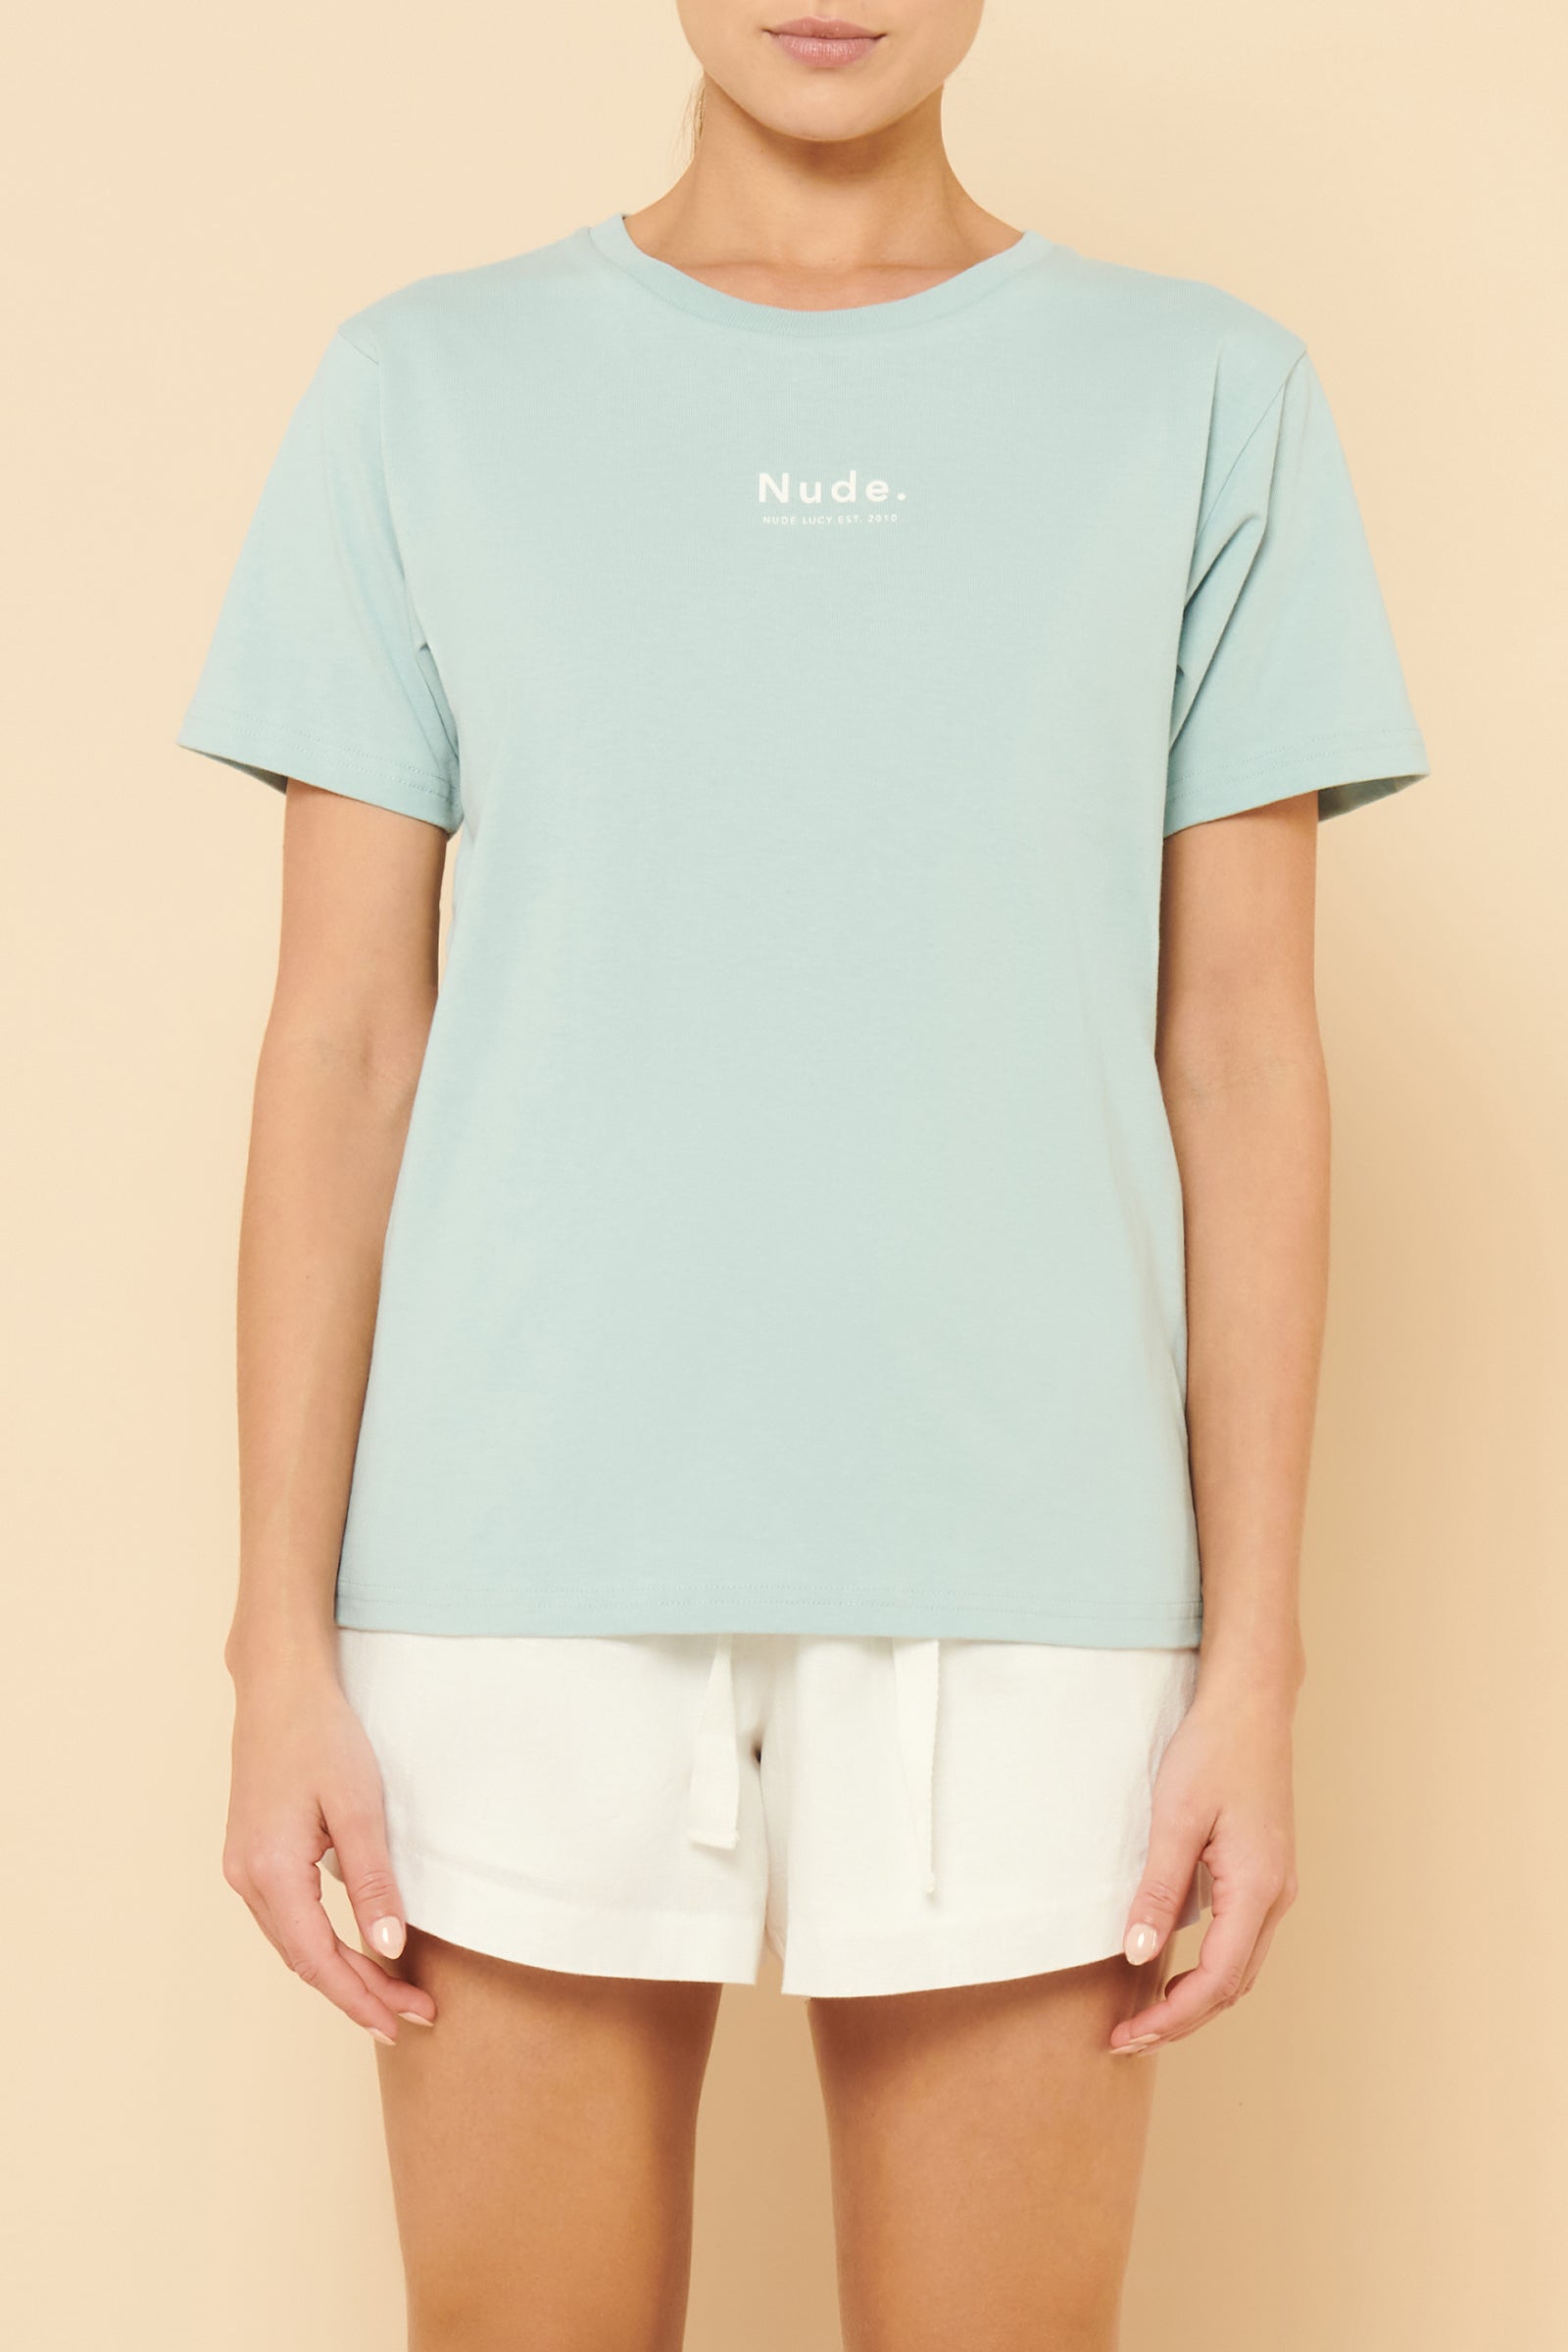 Nude Lucy Nude Organic Heritage Tee In A Blue Lagoon Colour 